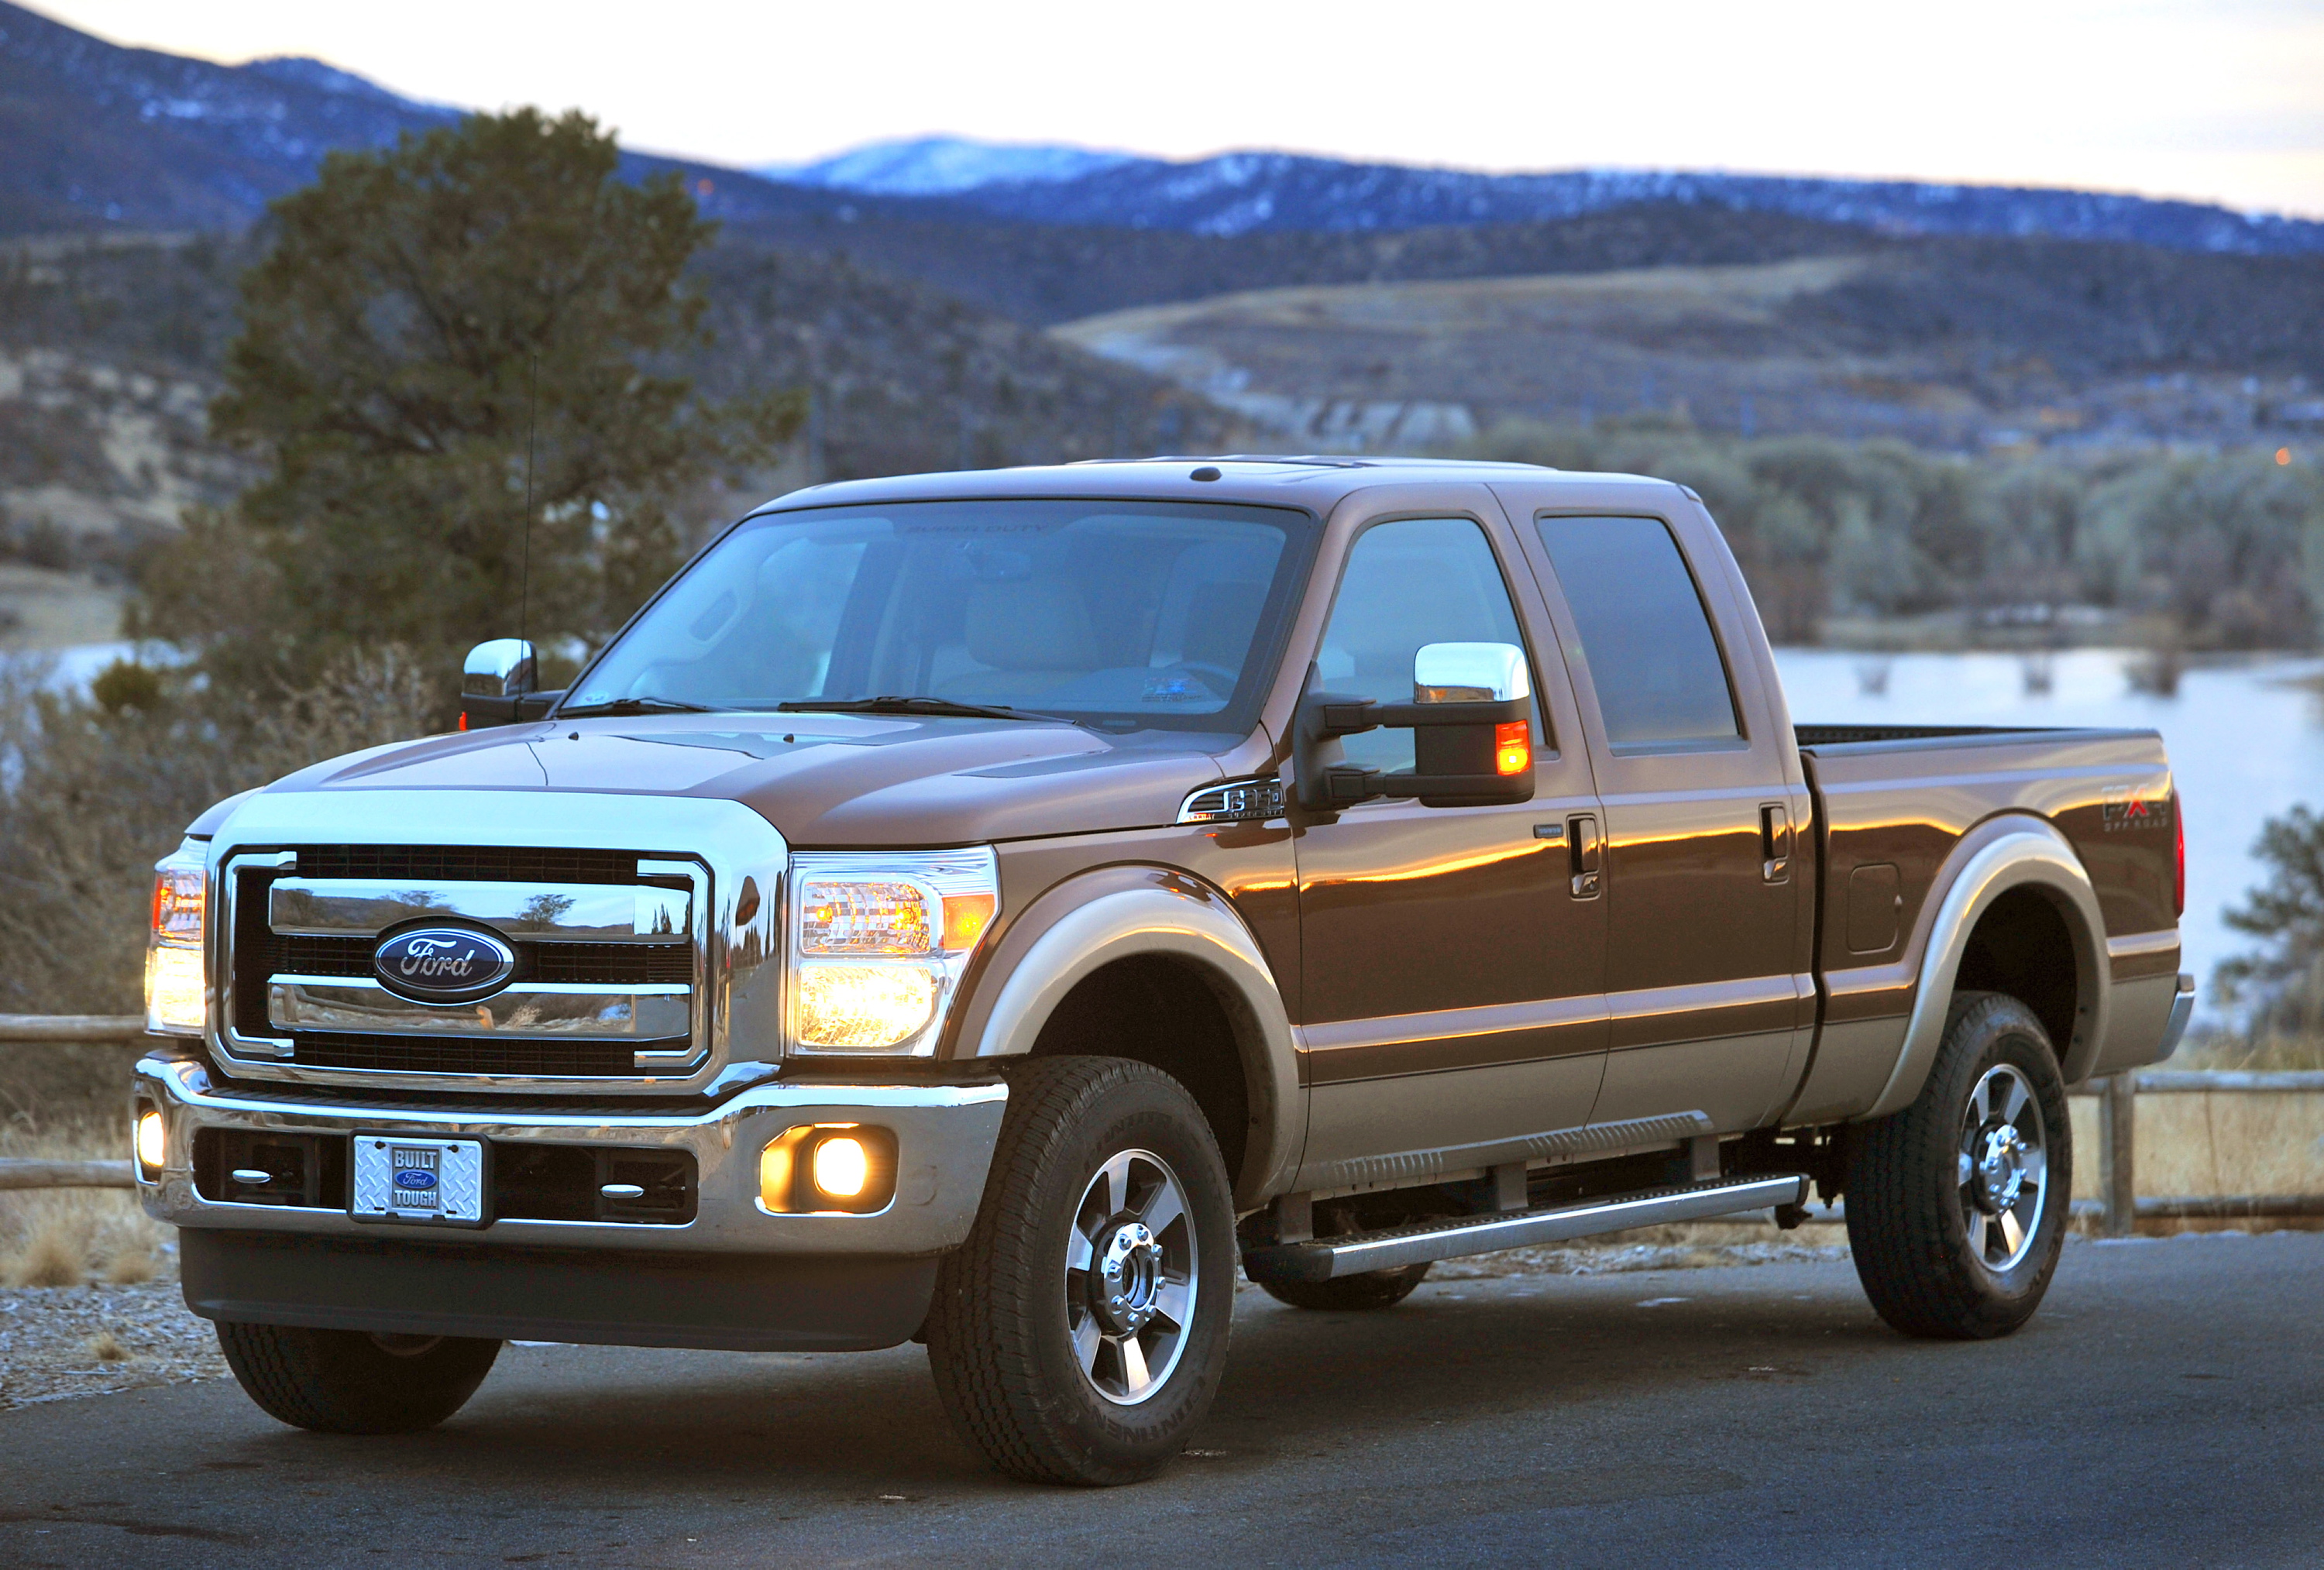 2011 Ford super duty information #8